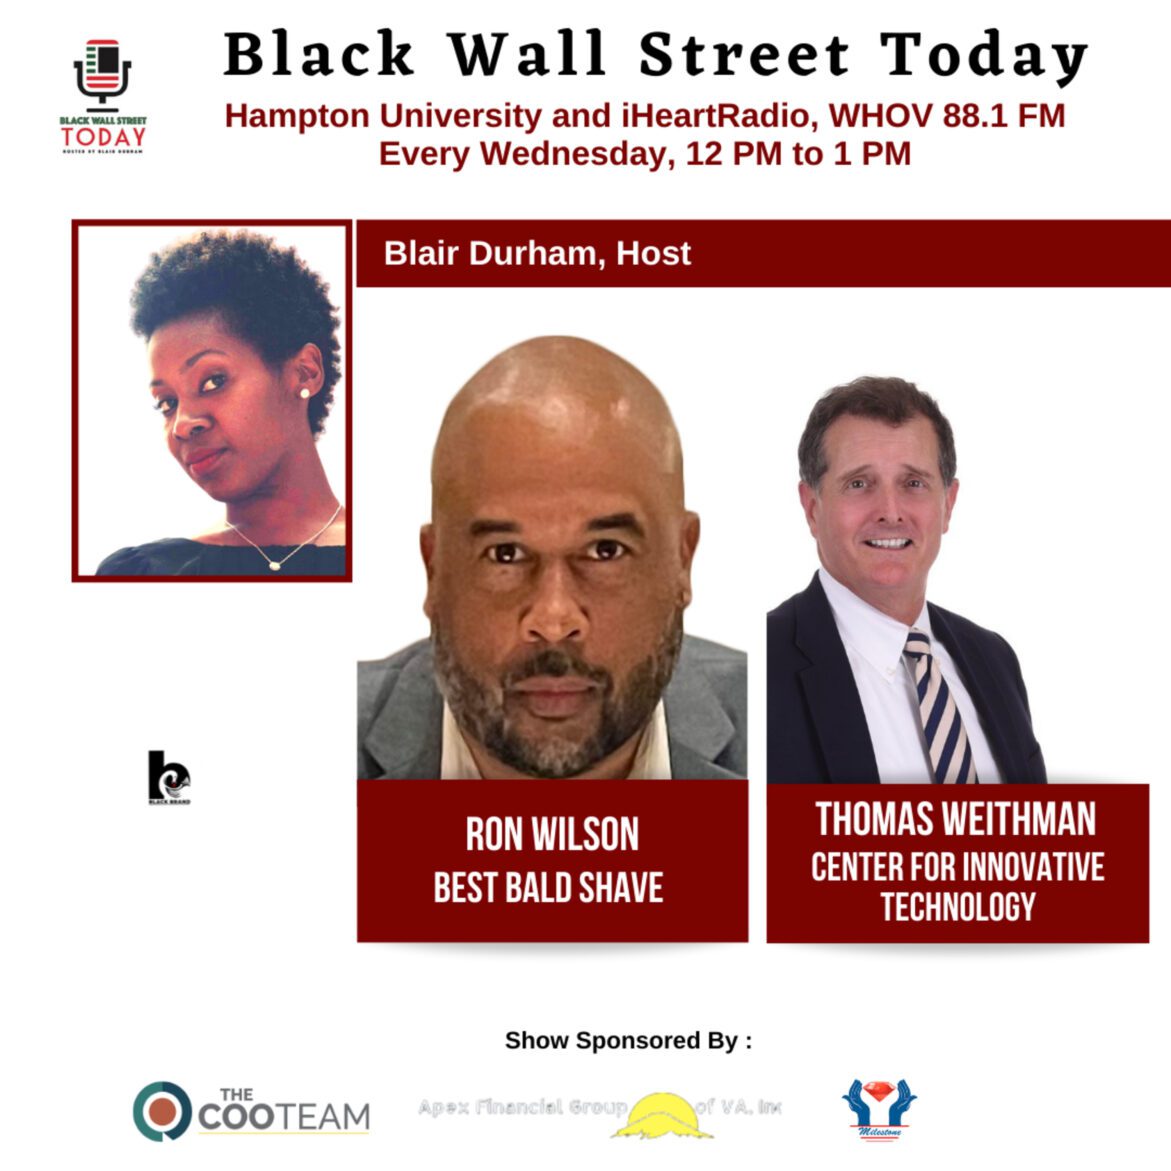 Black Podcasting - Best Bald Shave & The Center For Innovative Technology - Ron Wilson & Thomas Weithman on Black Wall Street Today with Blair Durham